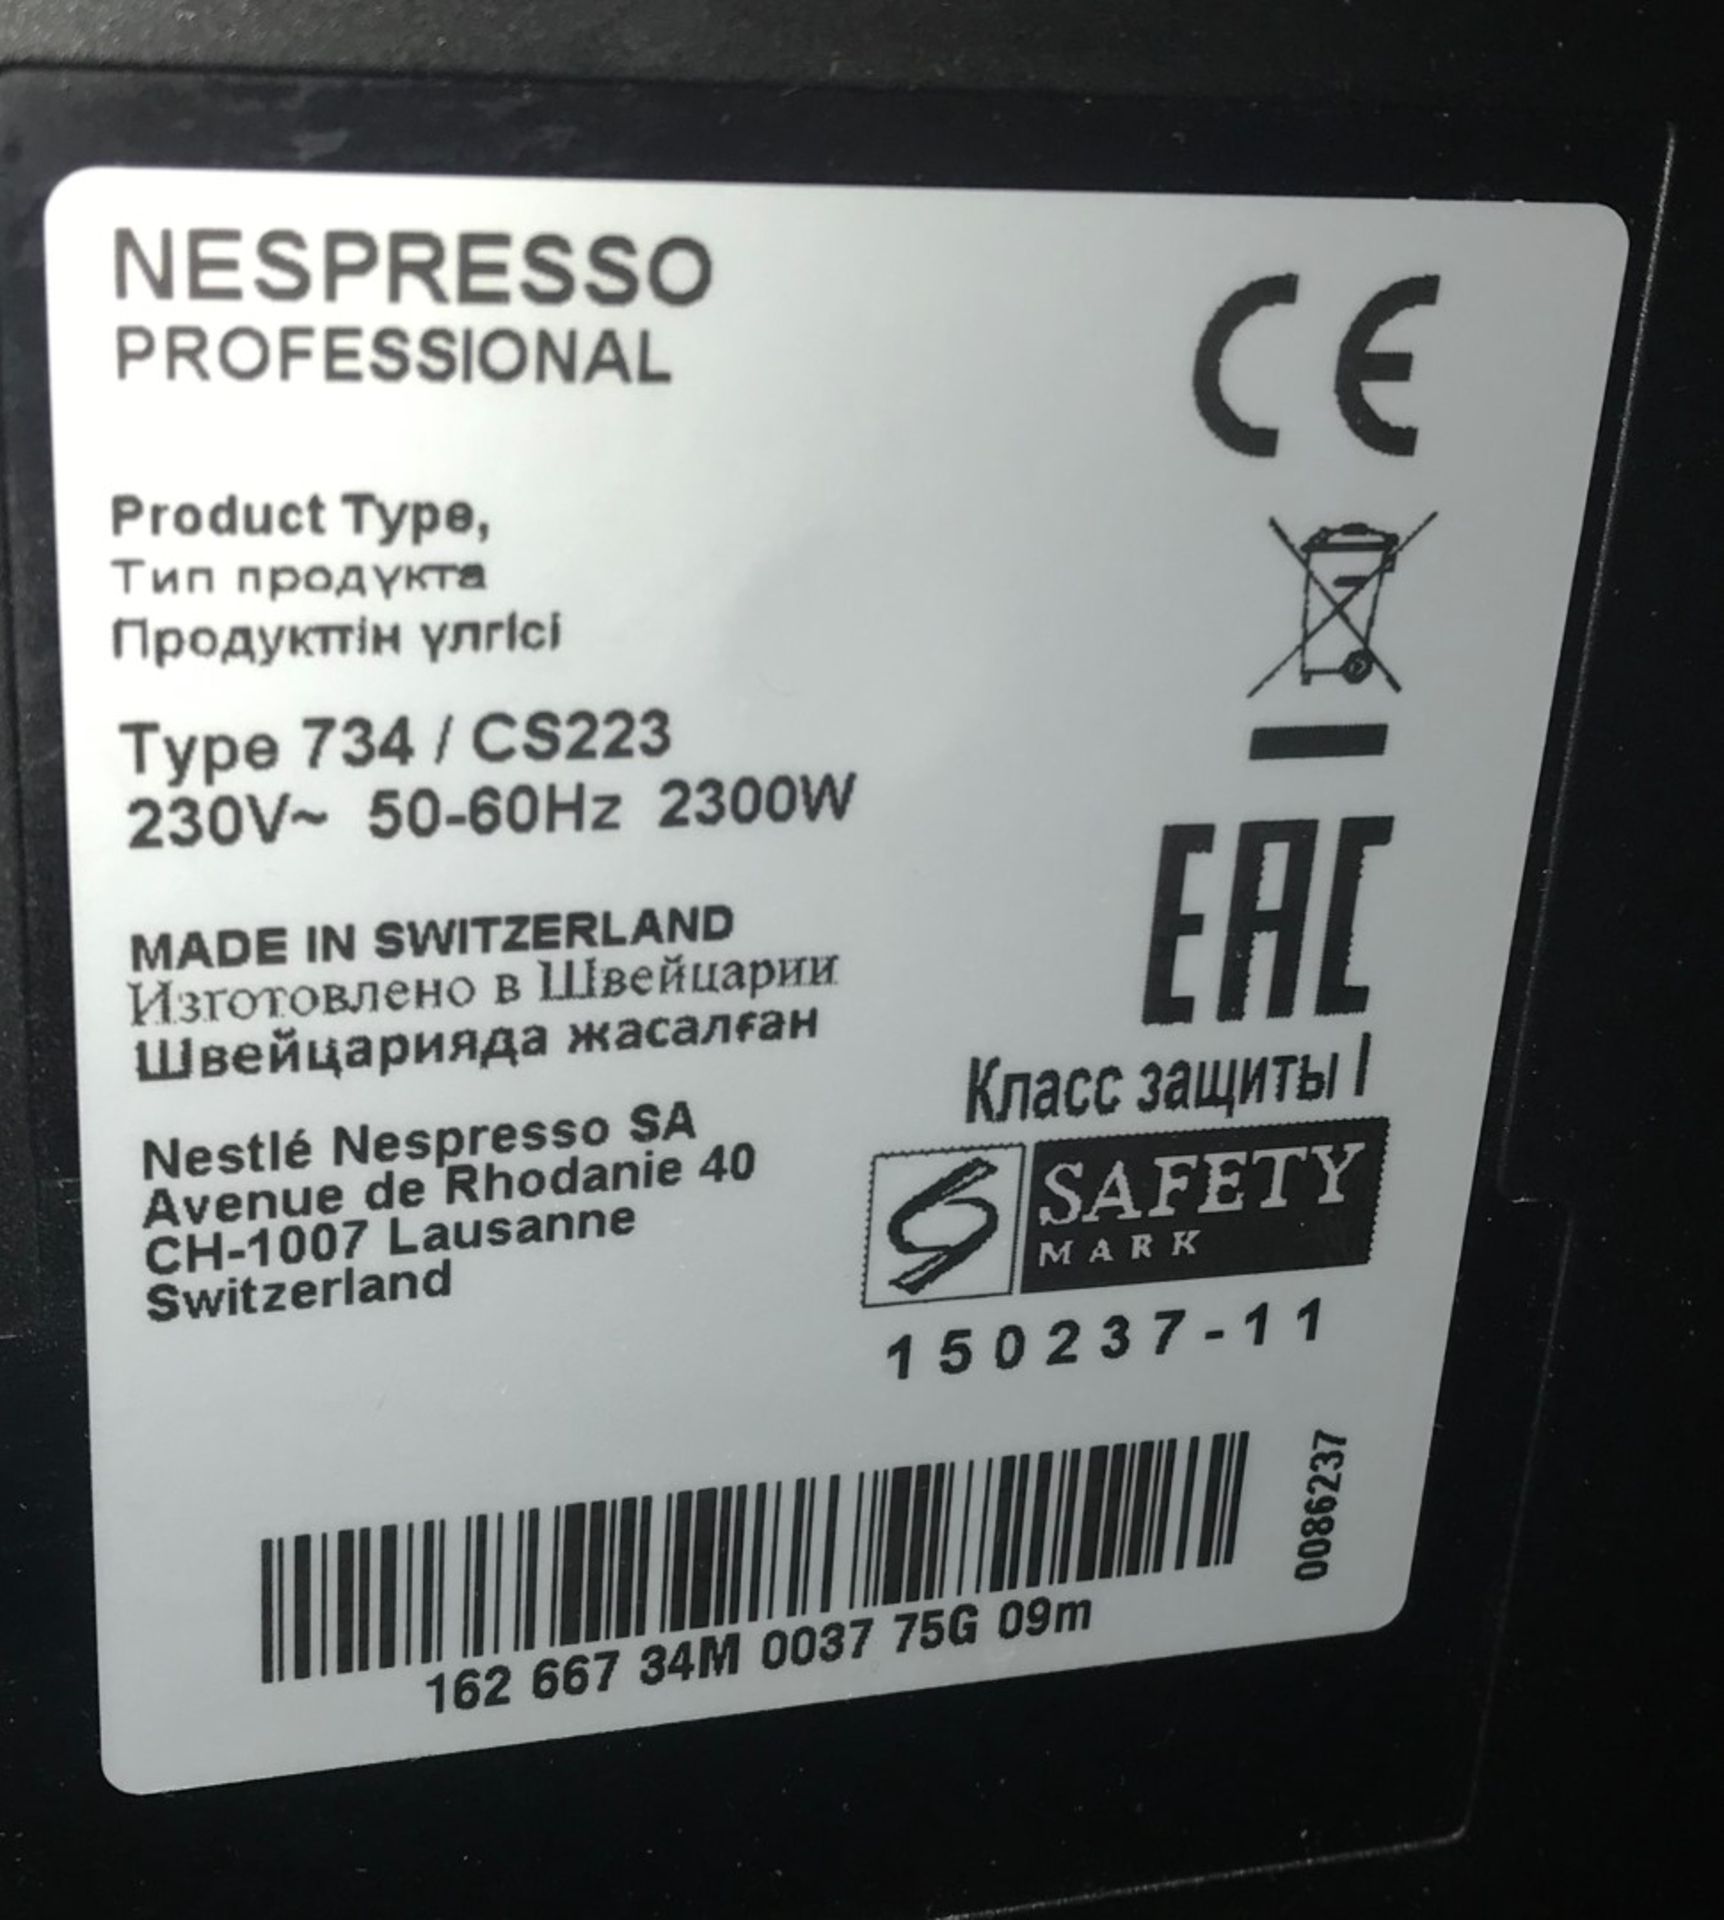 1 x Nespresso Gemini CS220 Pro Coffee Machine With Pod Holder and Pods - RRP £2,300 - Ref: RB275 - - Image 5 of 5